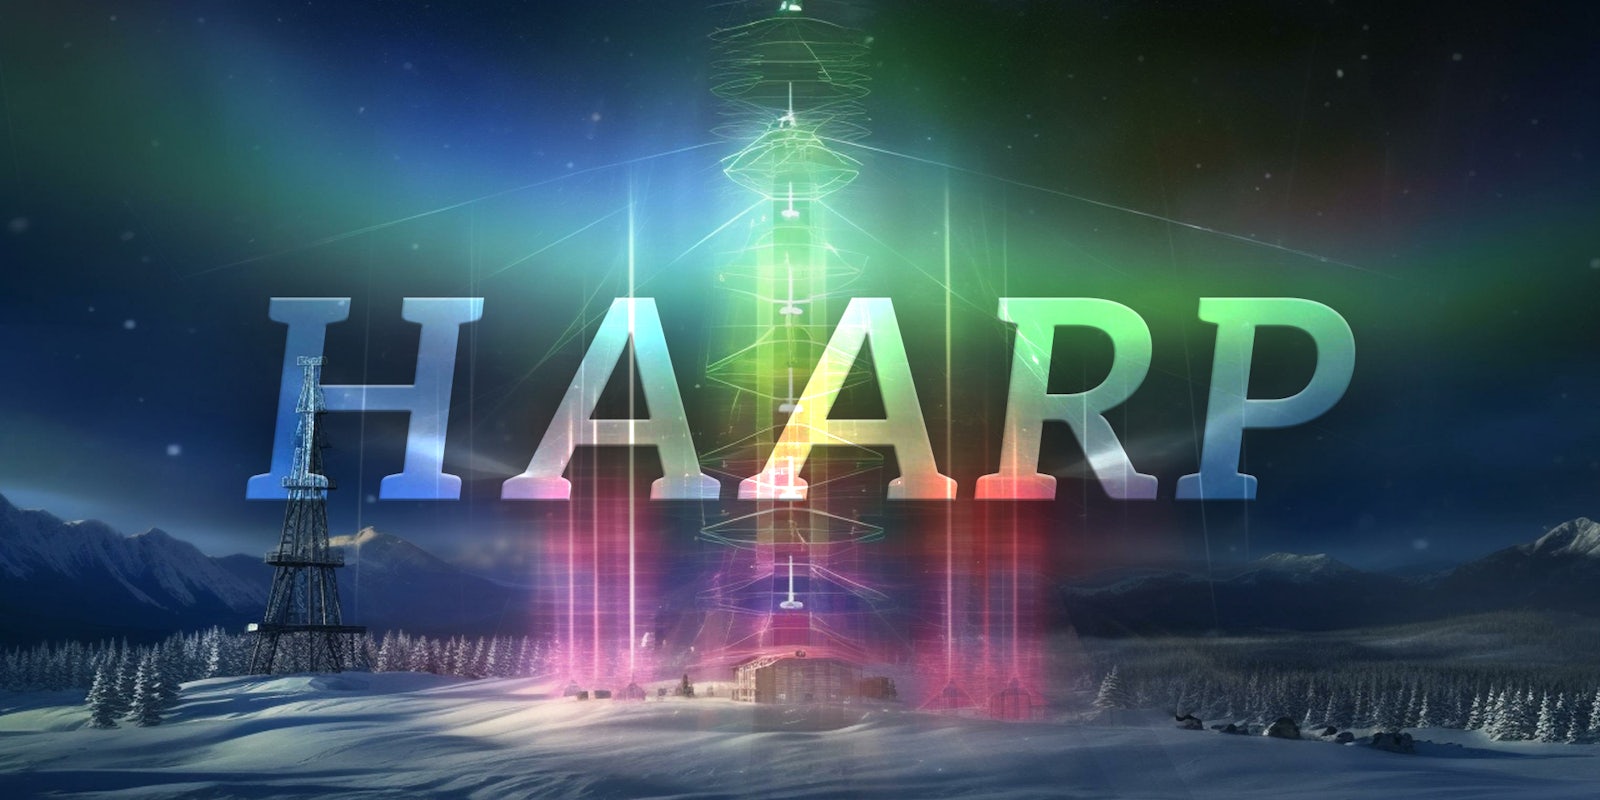 Conspiracy theorists blame HAARP for Northern Lights